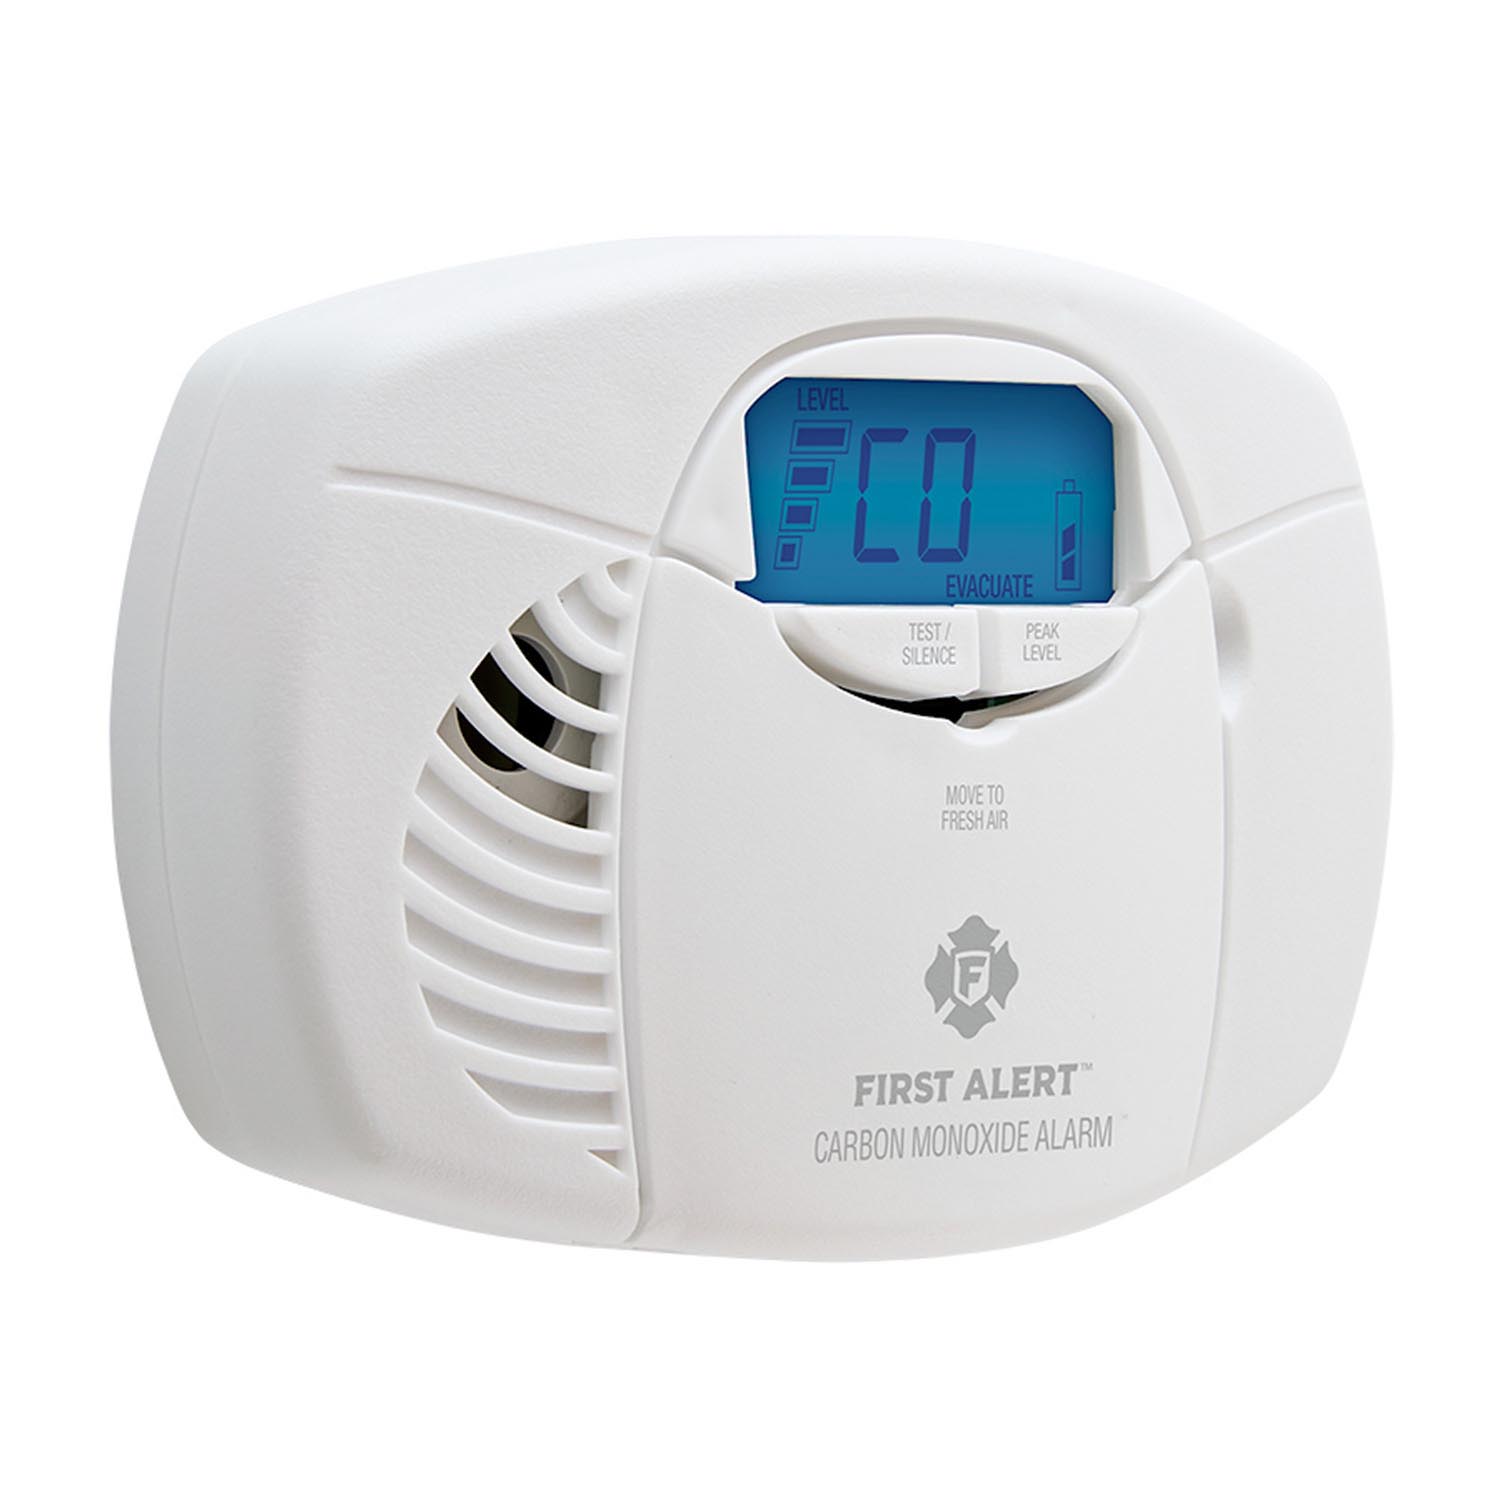 First Alert CO410 Battery Operated Carbon Monoxide Alarm - Digital Display